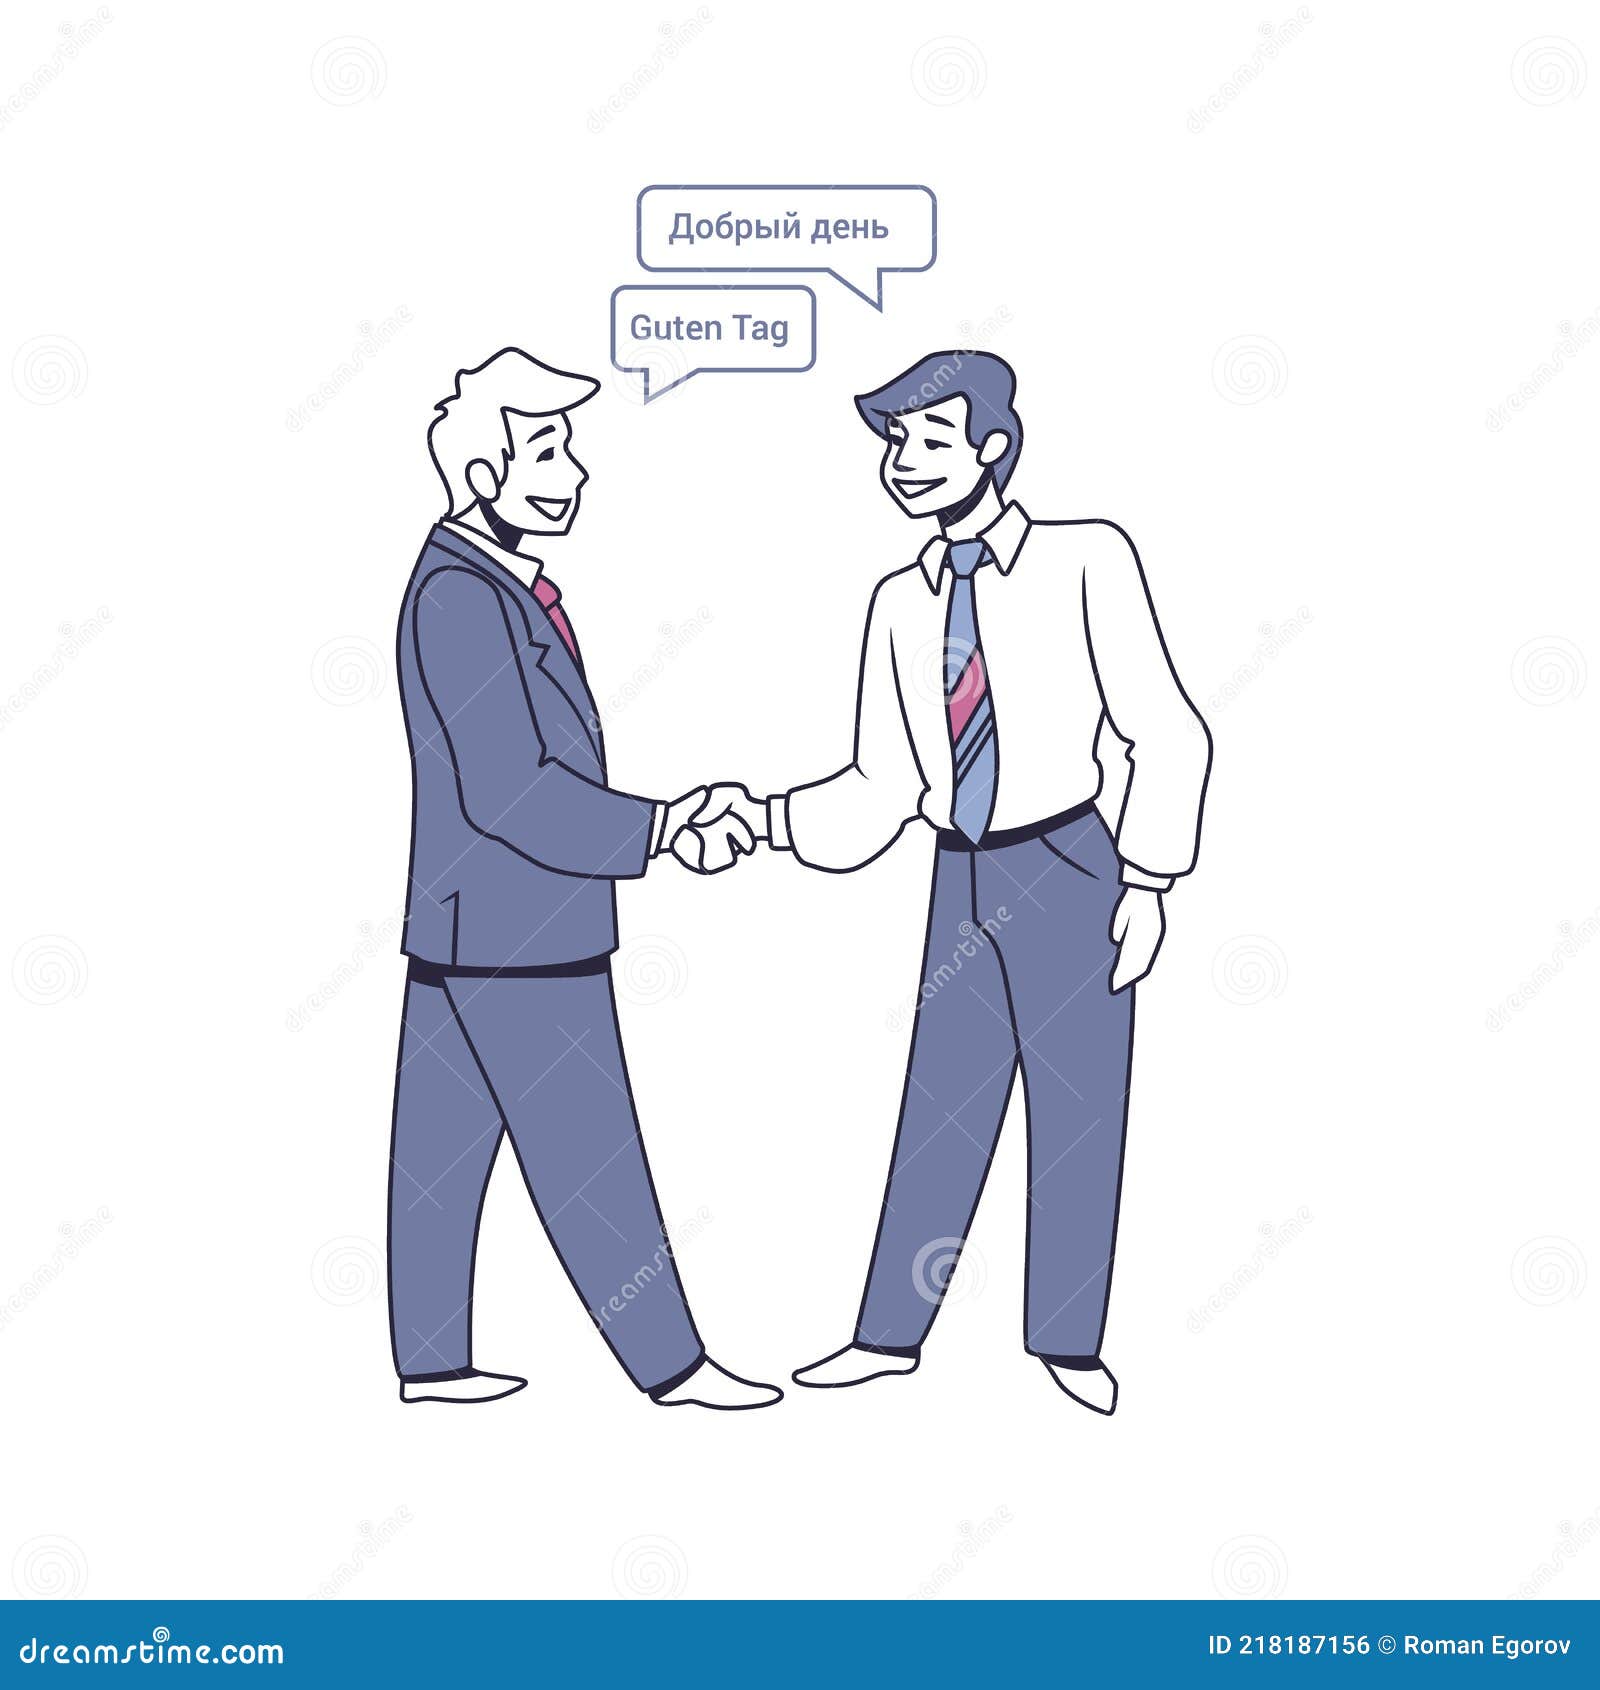 multilingual people. characters talking different foreign languages. office worker greets interlocutor and shakes hands